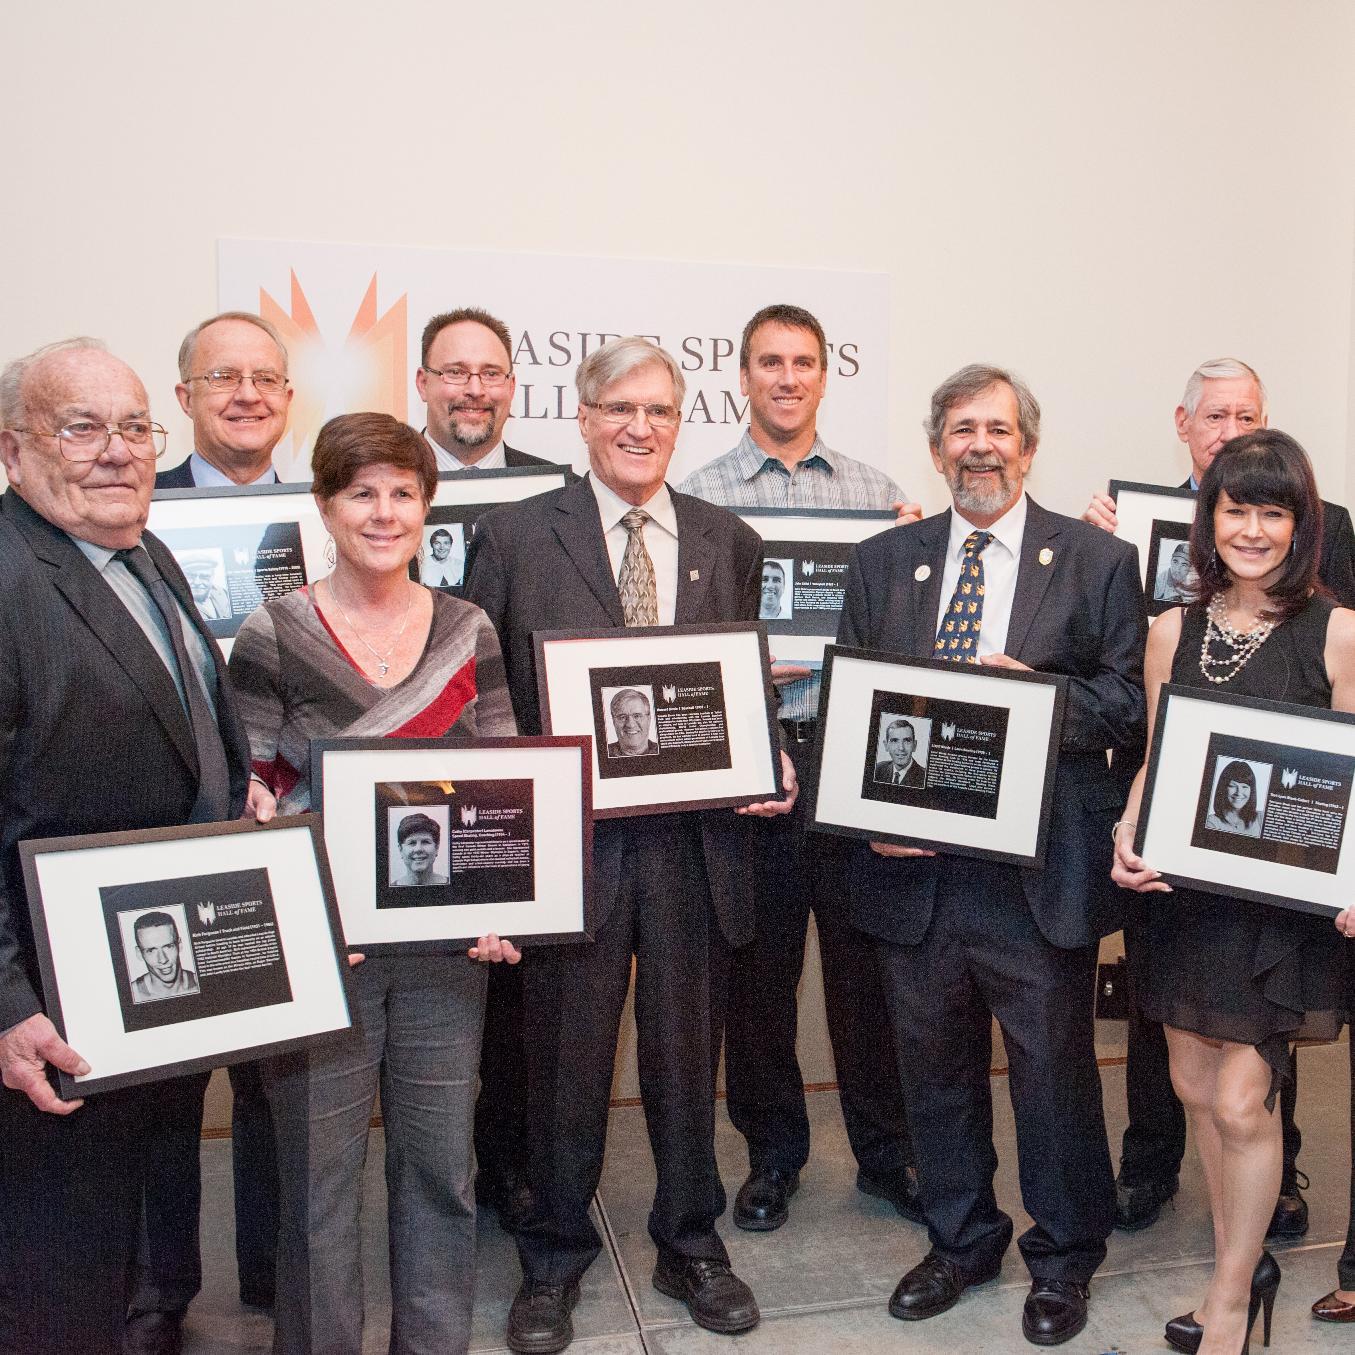 The Leaside Sports Hall of Fame is an initiative of our local sports associations & clubs to celebrate sport in Leaside.